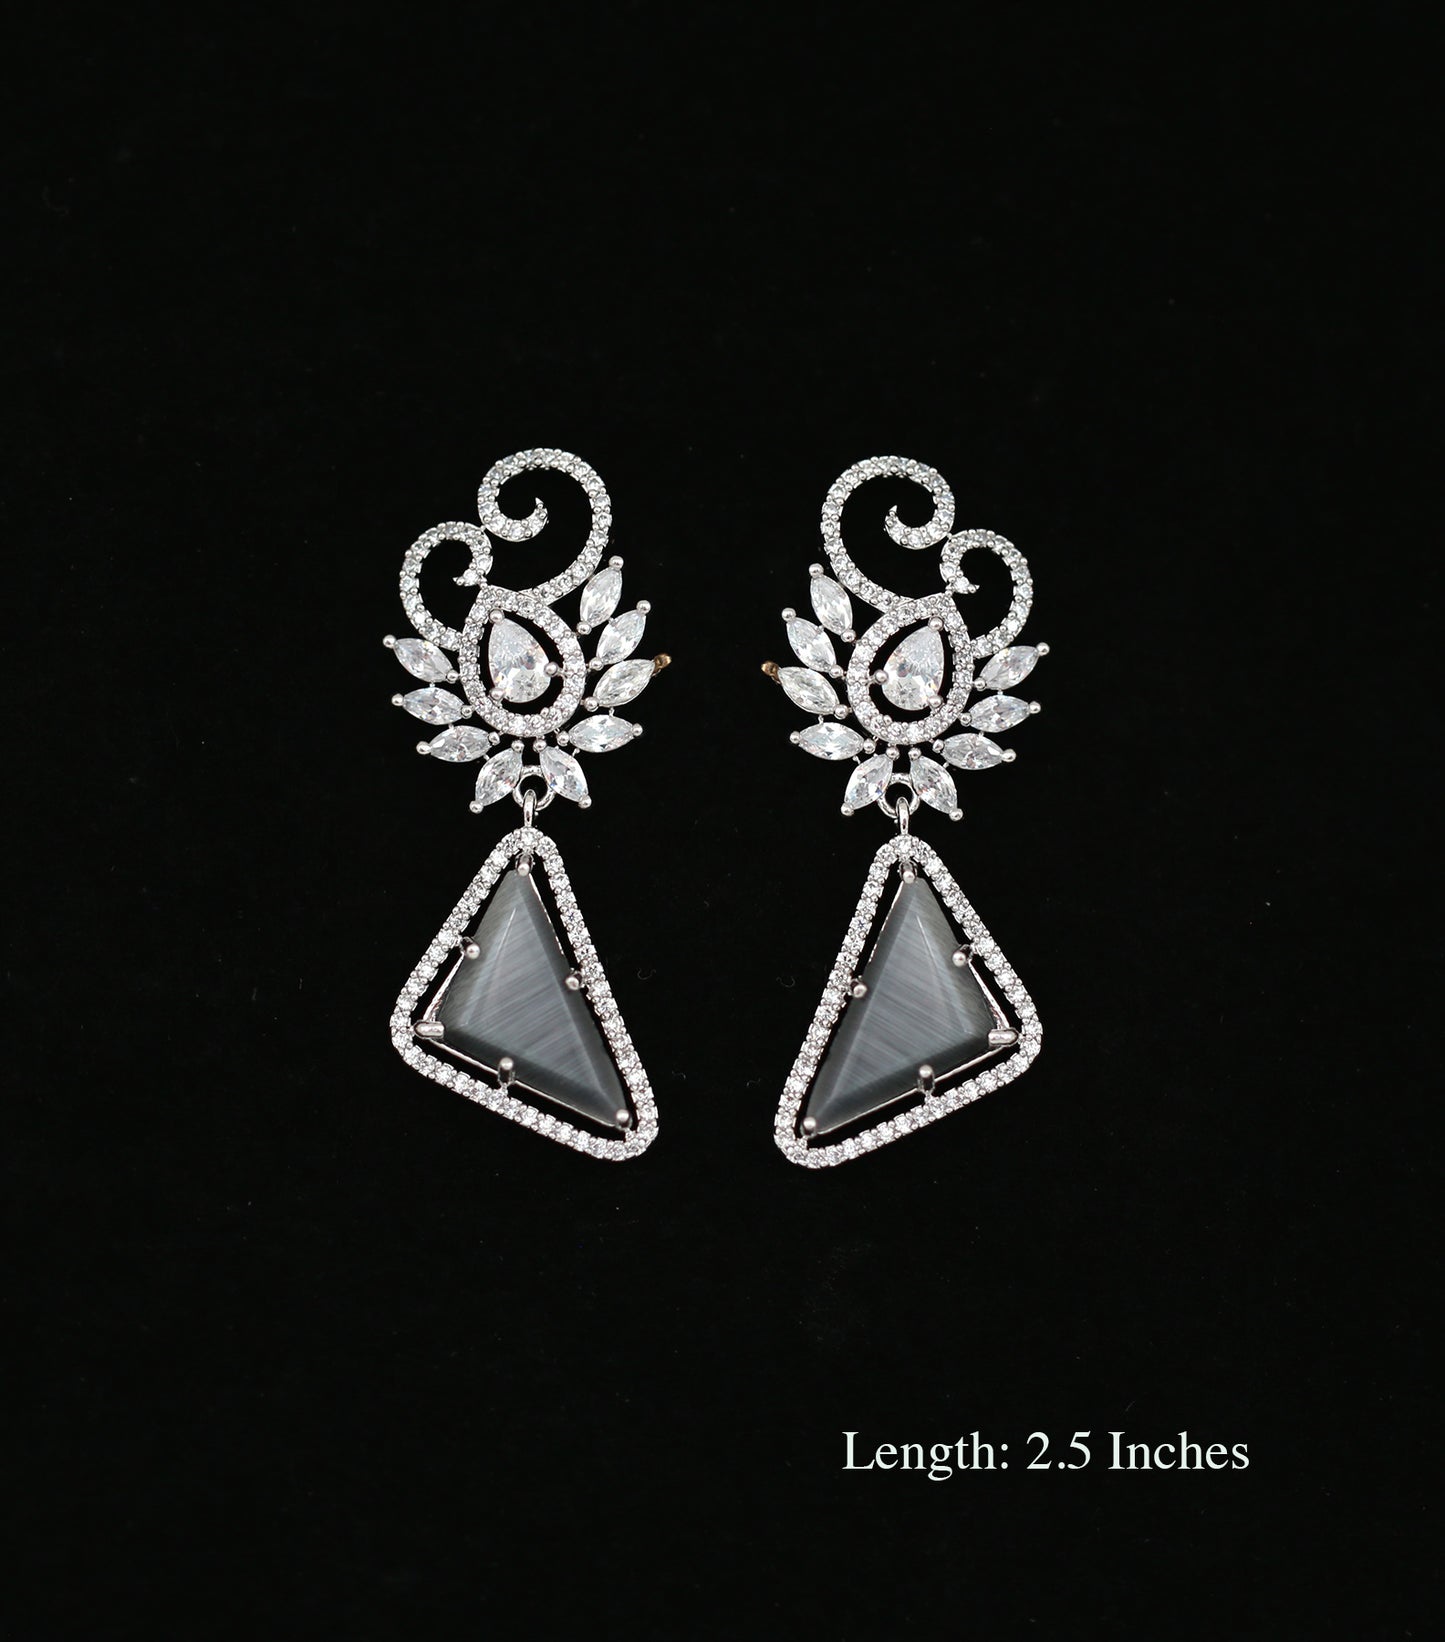 Best Quality Silver Cubic Zirconia Triangle Drop Earrings with acrylic Stone fashion womens jewelry